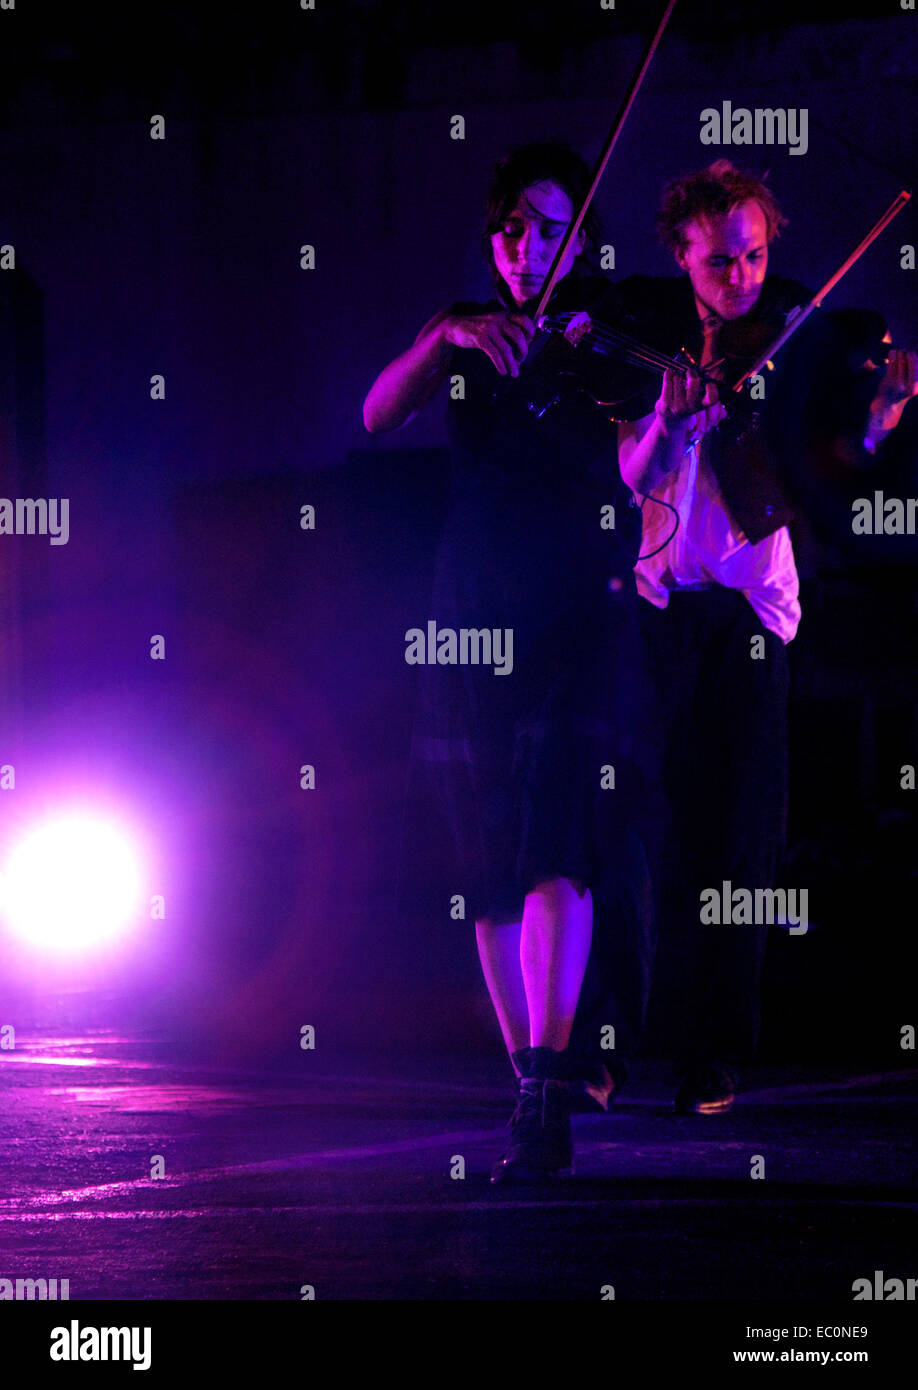 Two violinists in a purple light Stock Photo